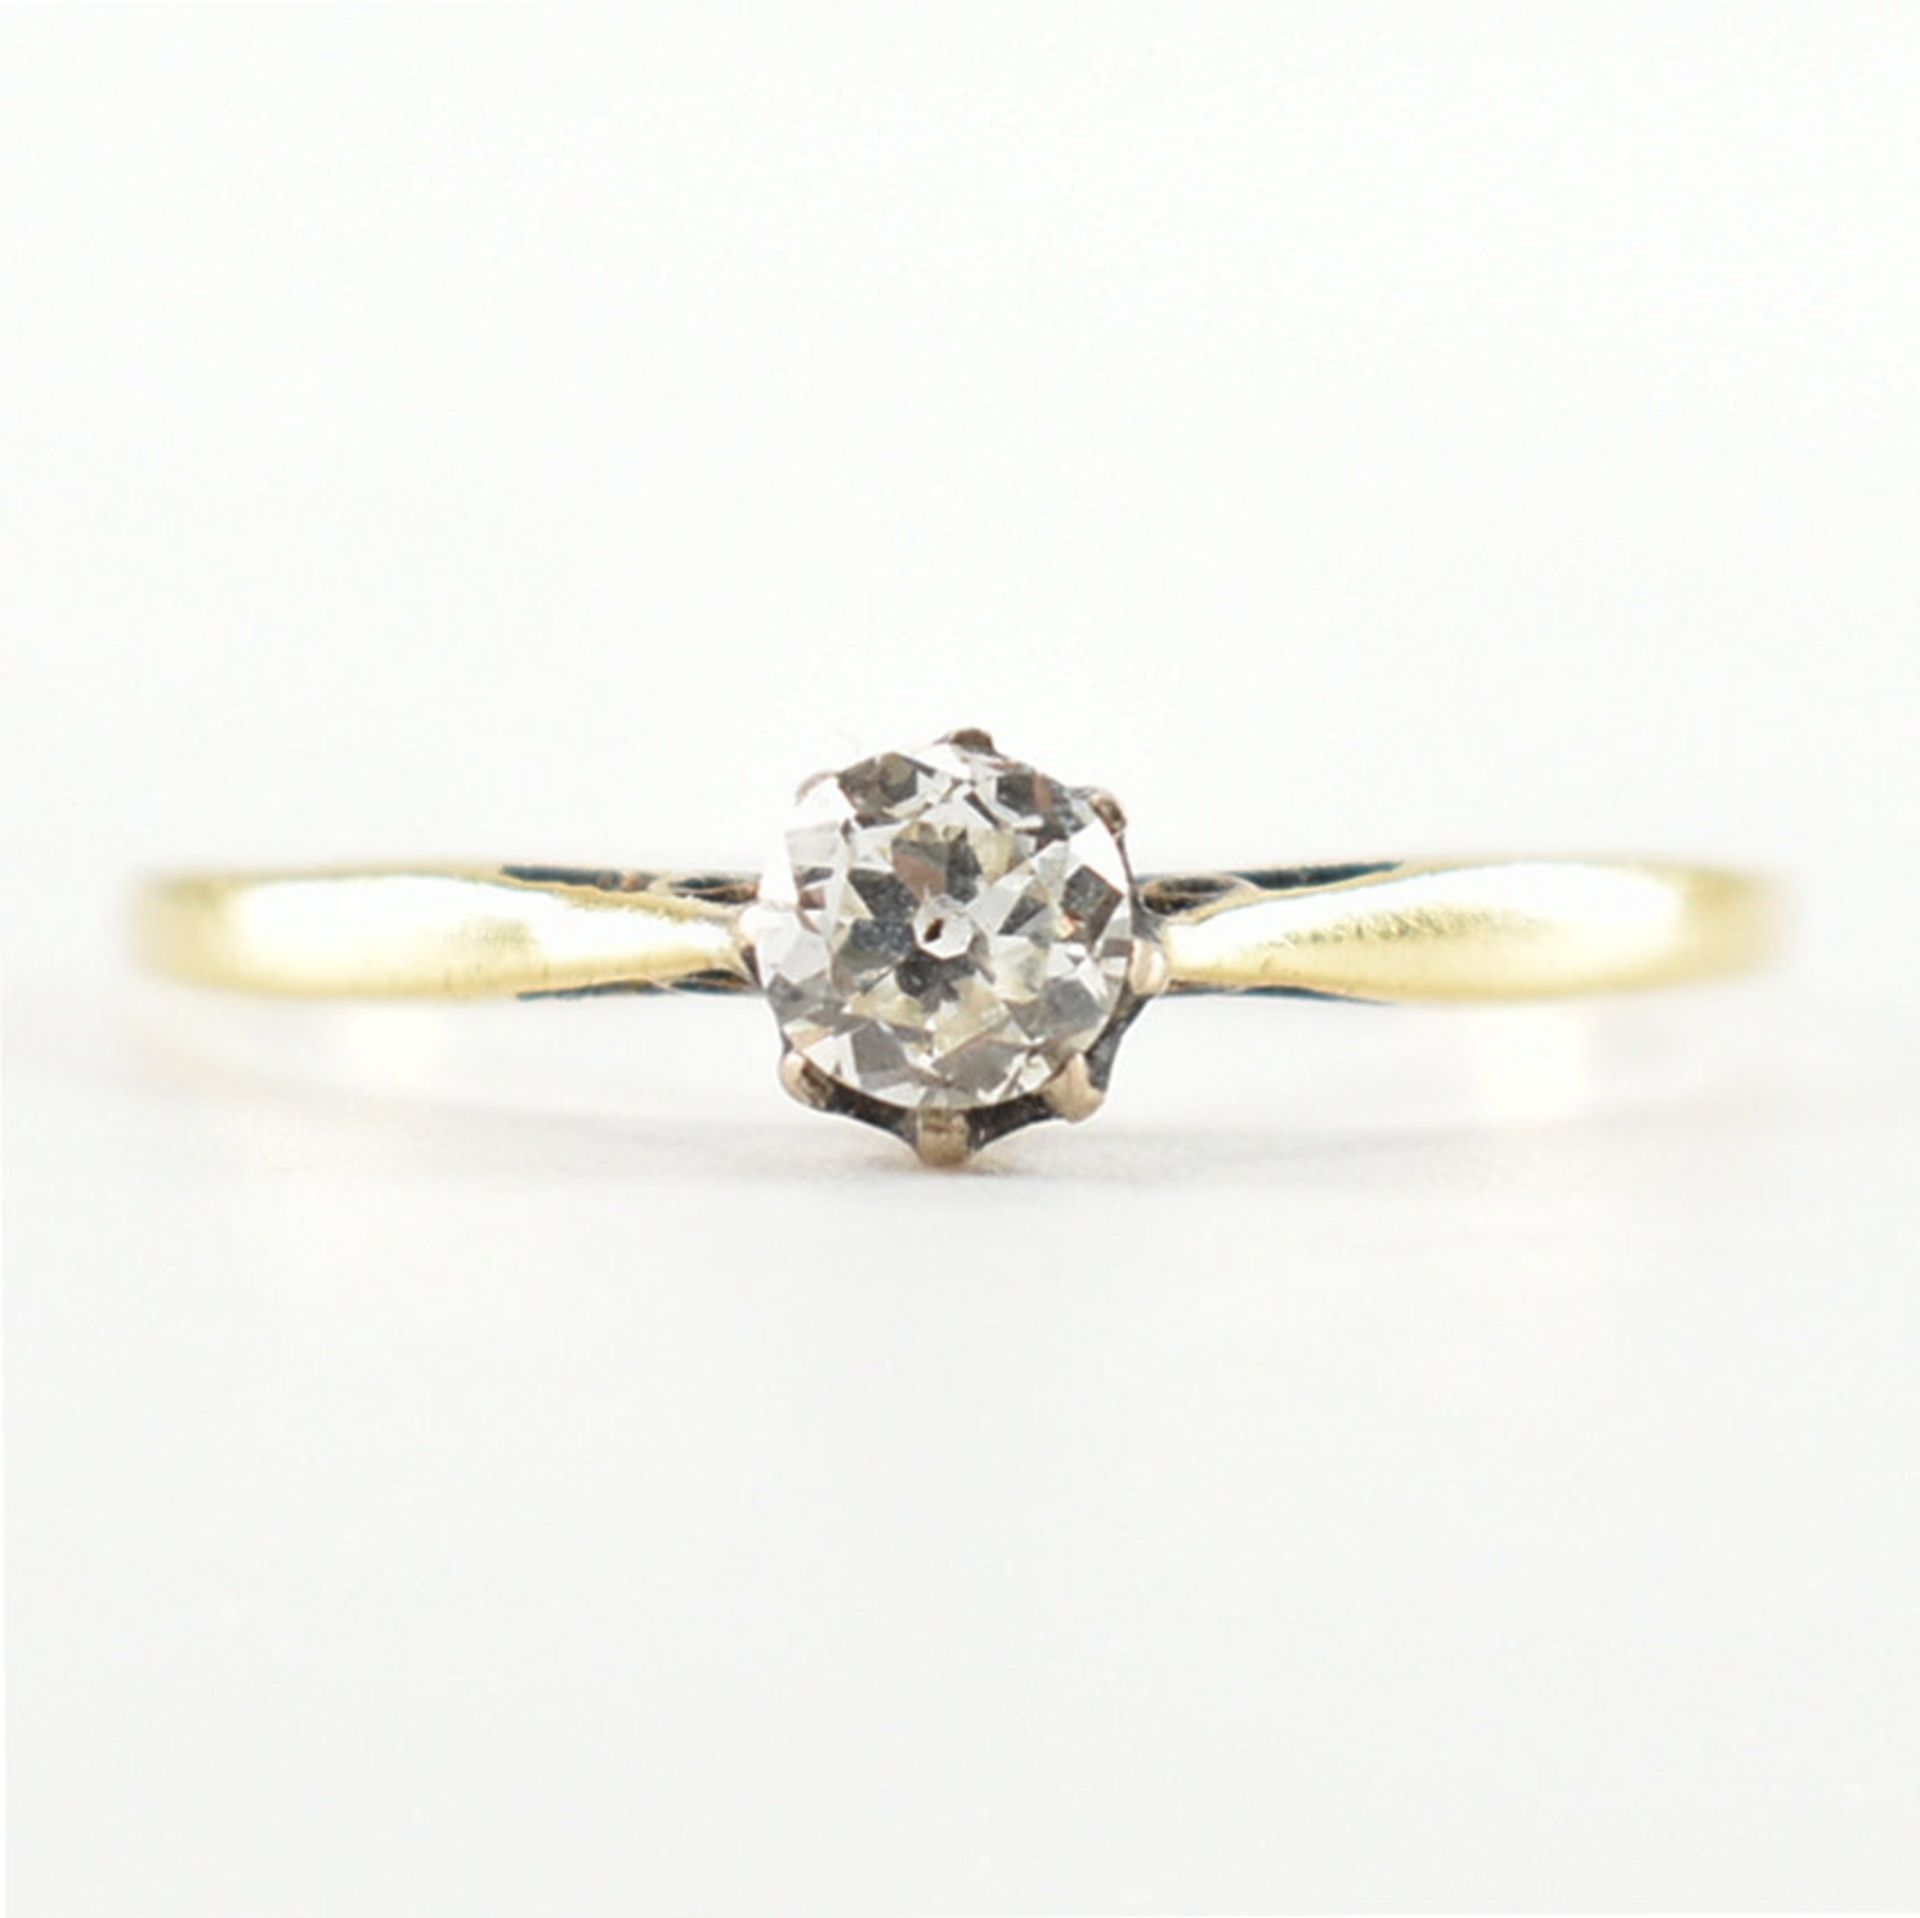 VINTAGE GOLD & DIAMOND SOLITAIRE RING